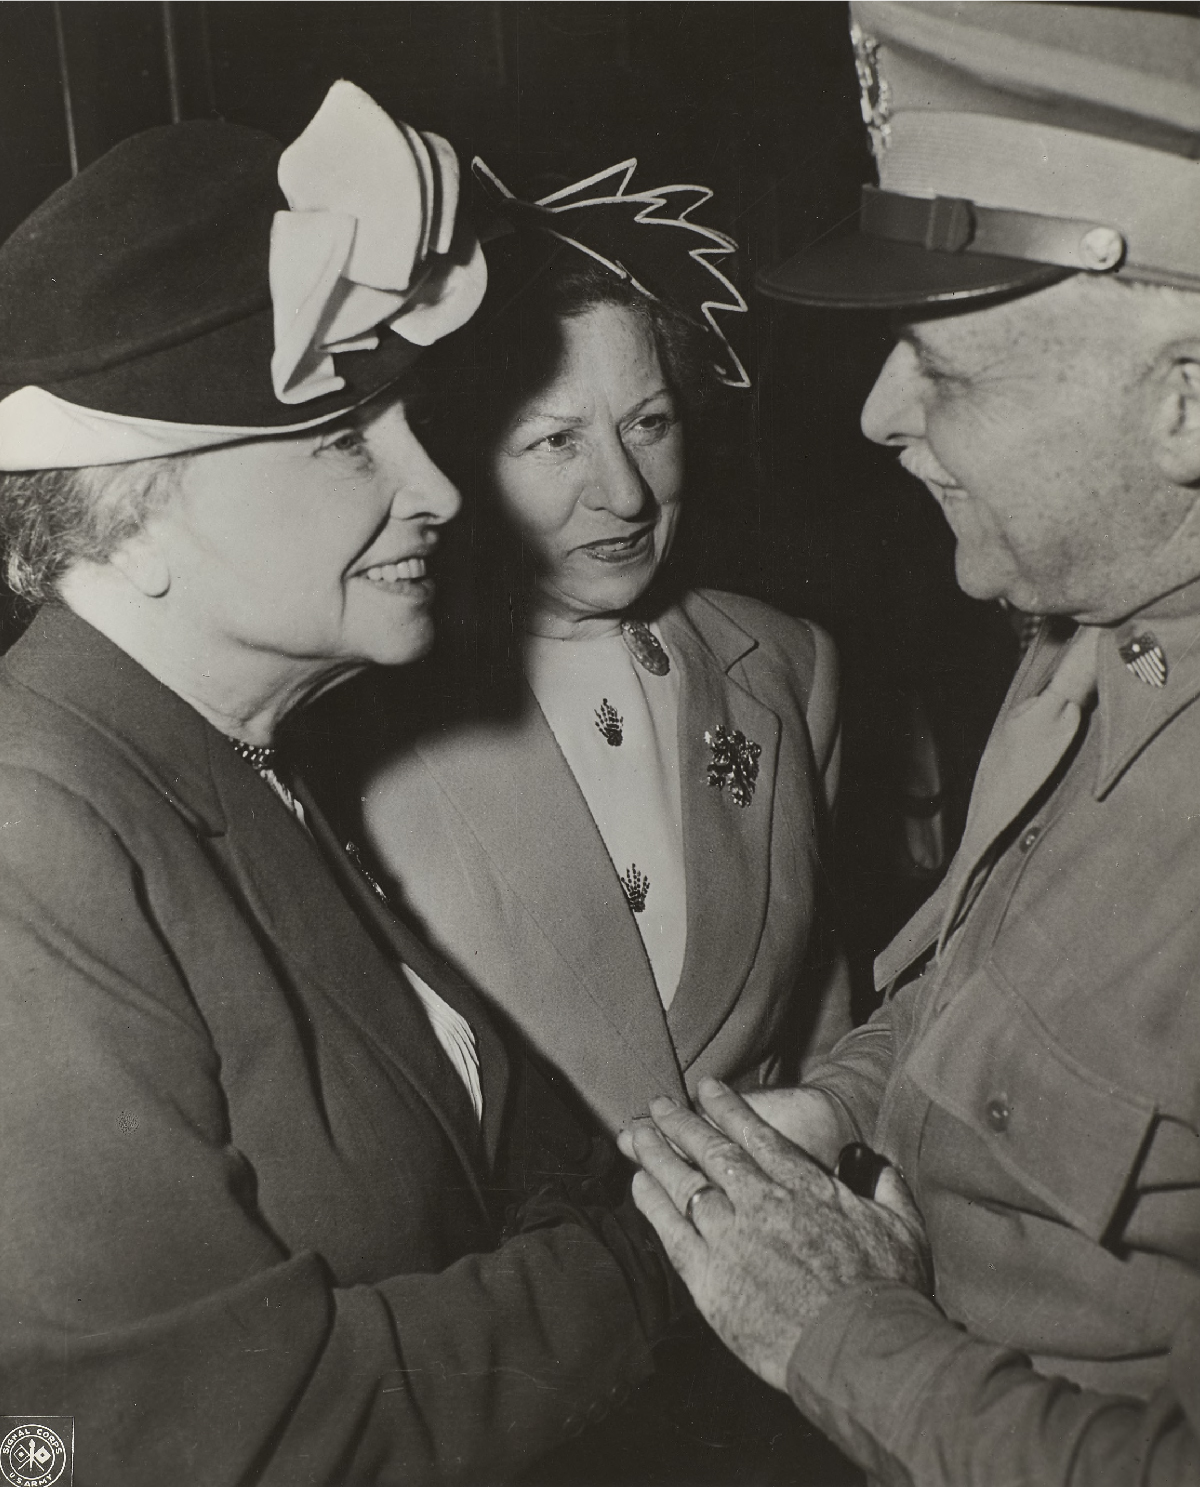 Helen Keller and Polly Thomson shake hands with Colonel Harbison in Tokyo.